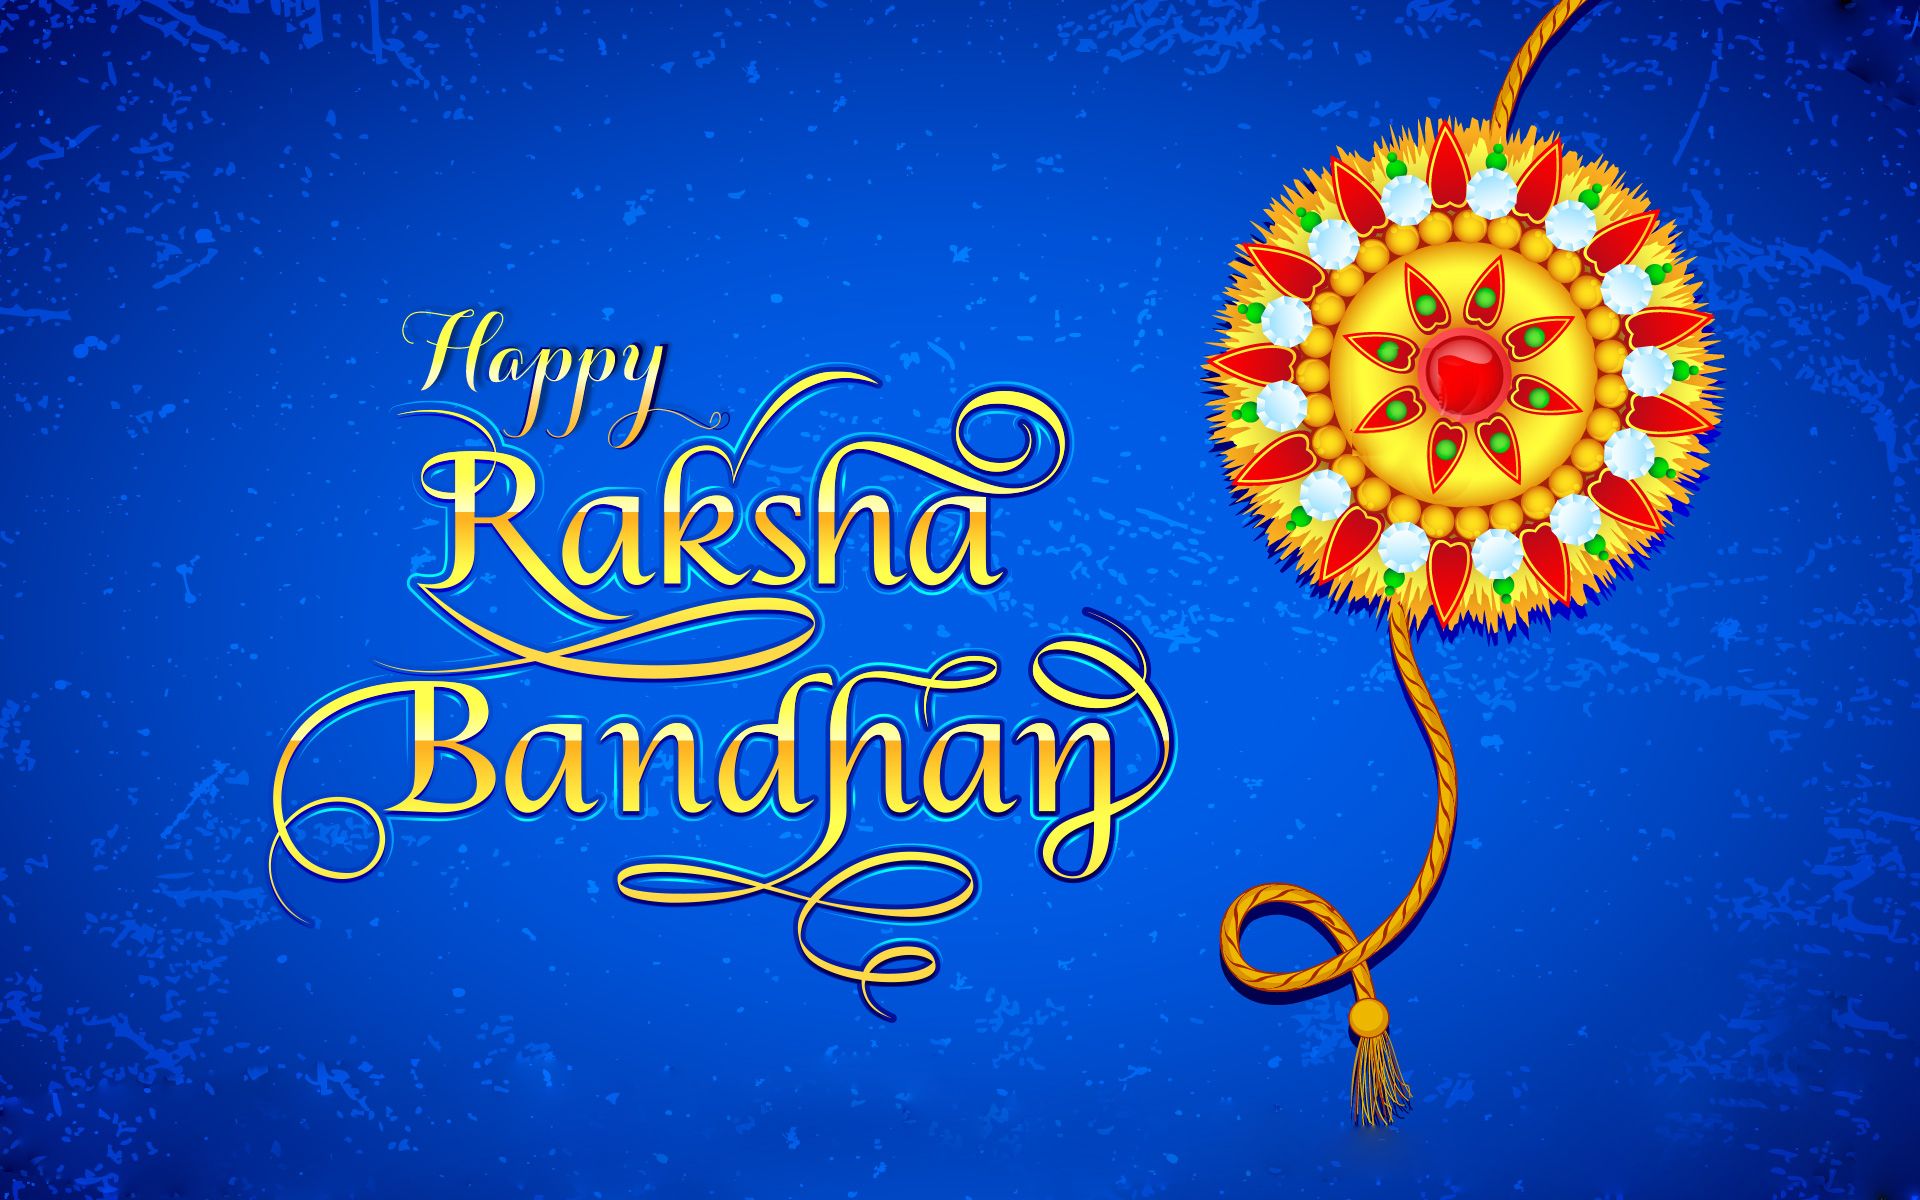 Happy Raksha Bandhan 2020 HD Images, Ultra-HD Photos, And 4K Wallpapers For  WhatsApp, Messenger, Viber, And iMessages For Brothers And Sisters